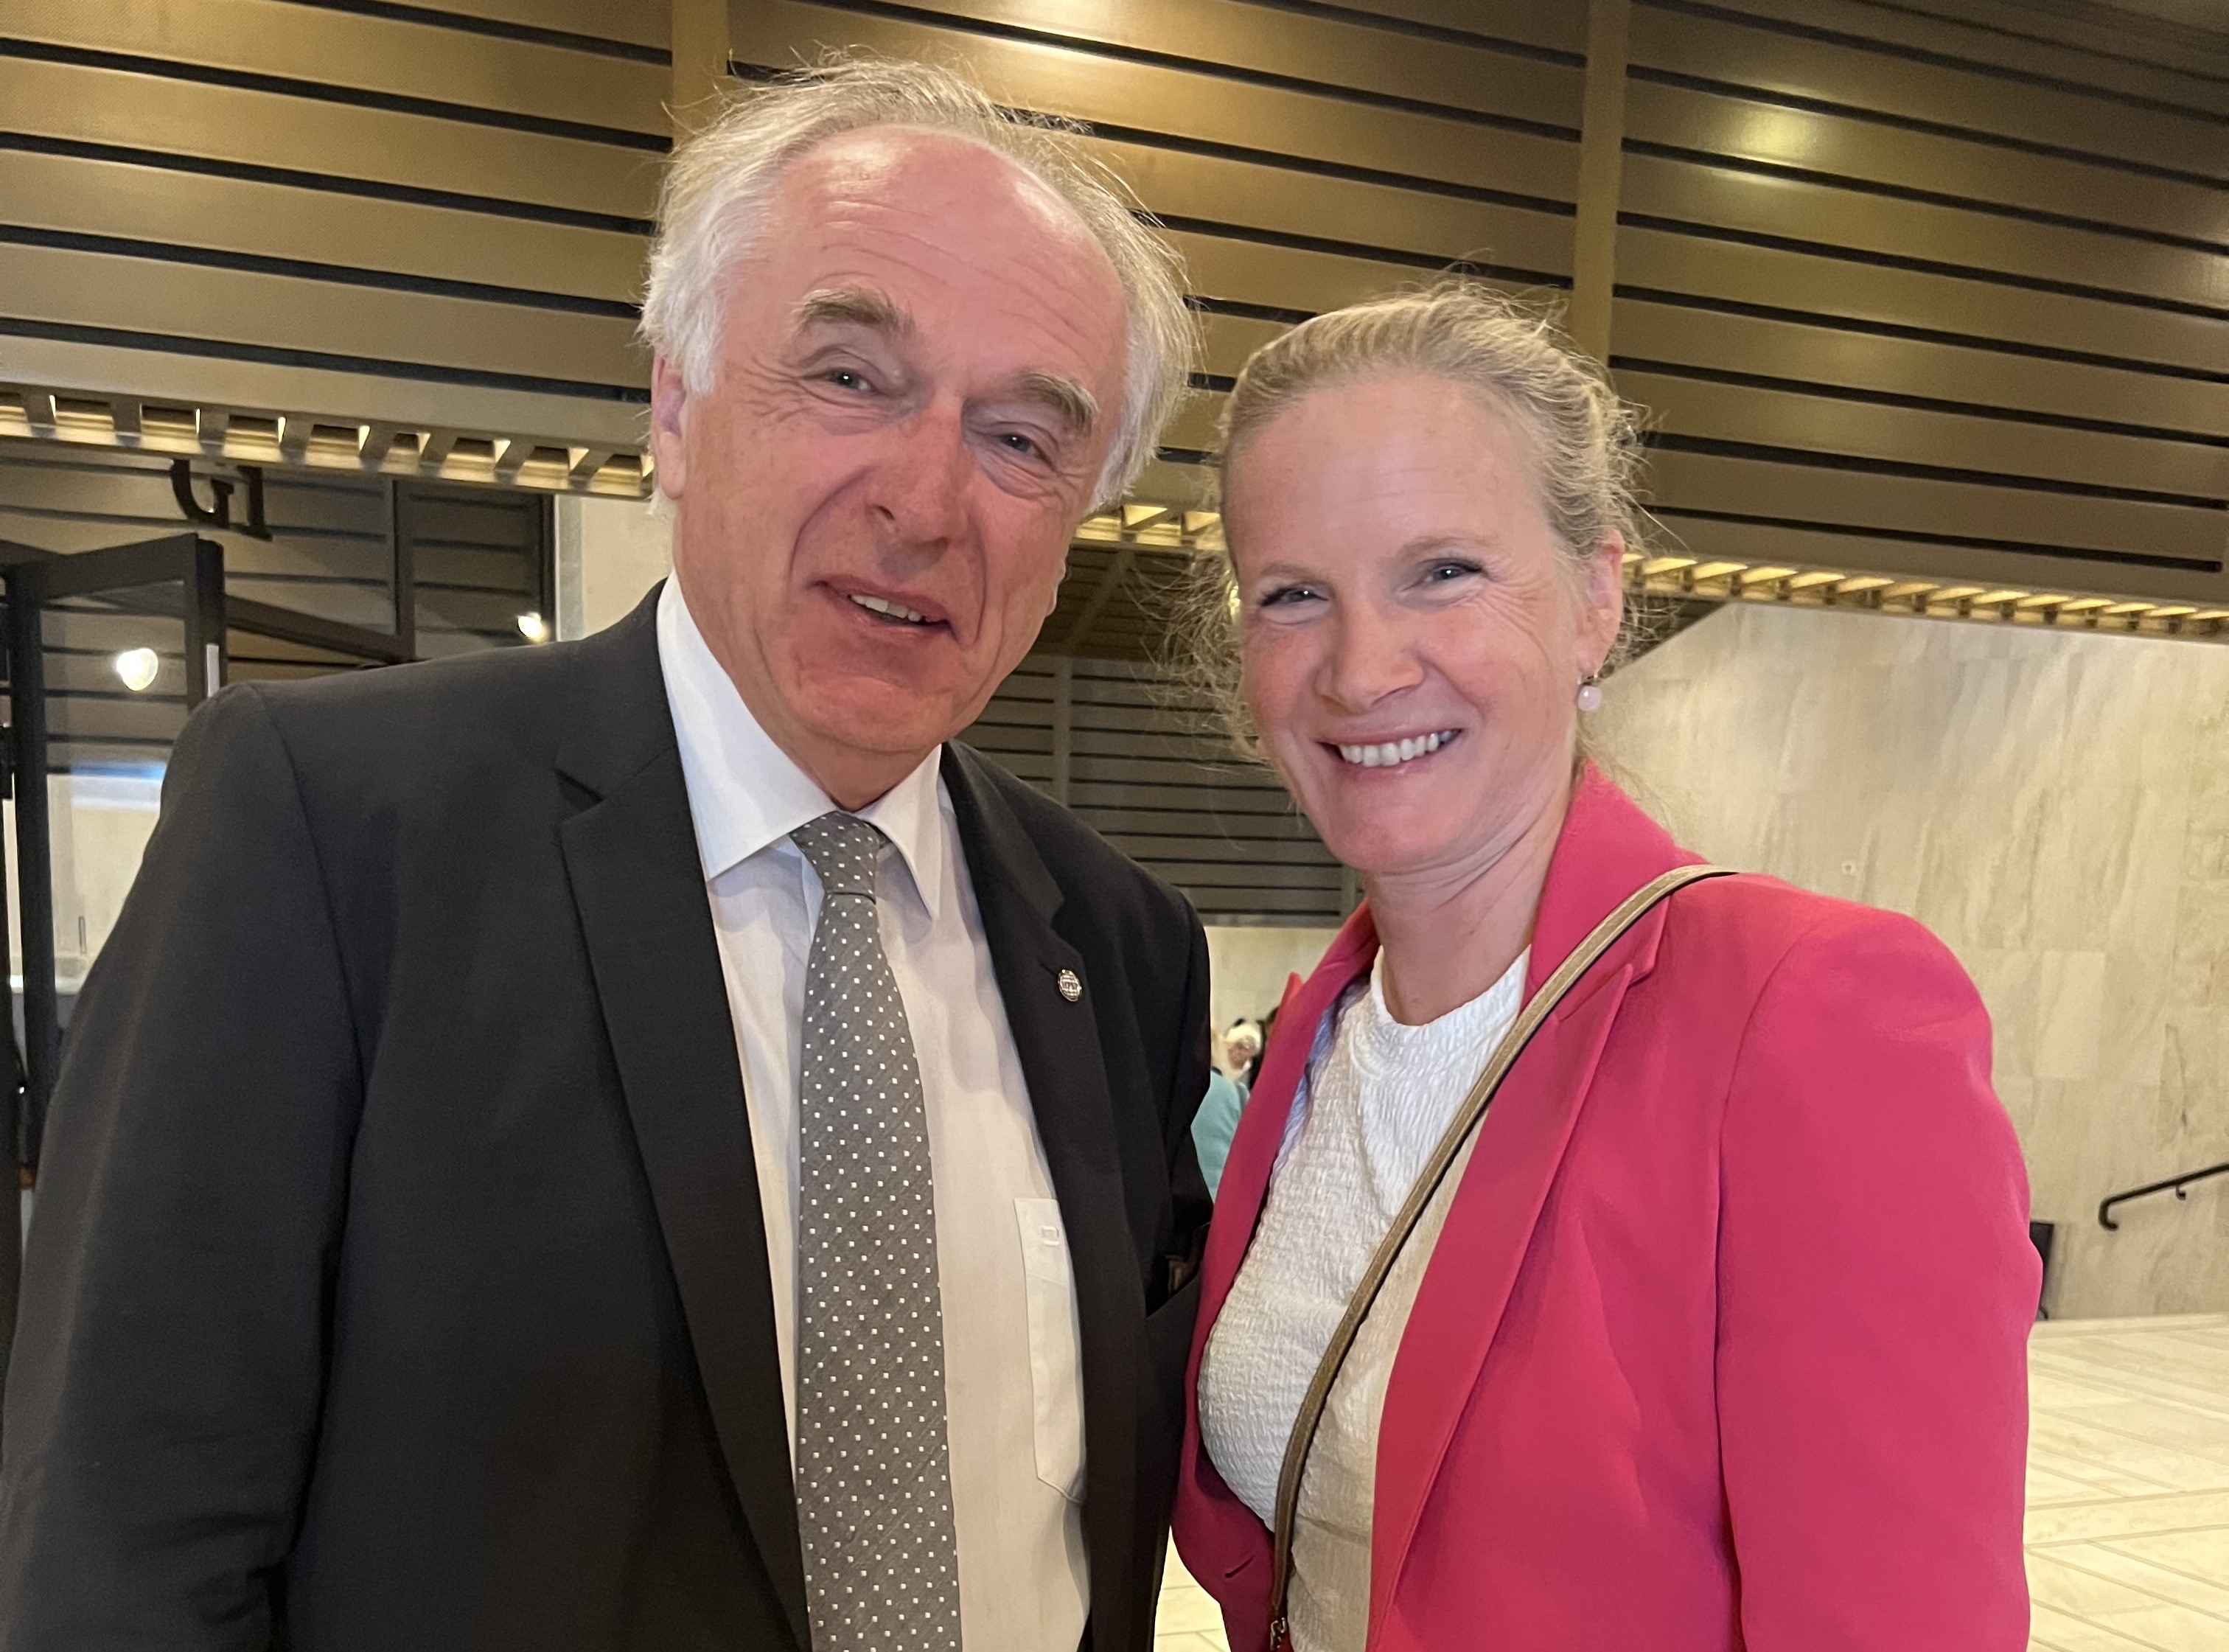 HFSP Secretary-General Pavel Kabat and Research Council of Norway’s Managing Director, Mari Sundli Tveit agreed that Norway would join HFSP to advance frontier life science research in Norway and worldwide.